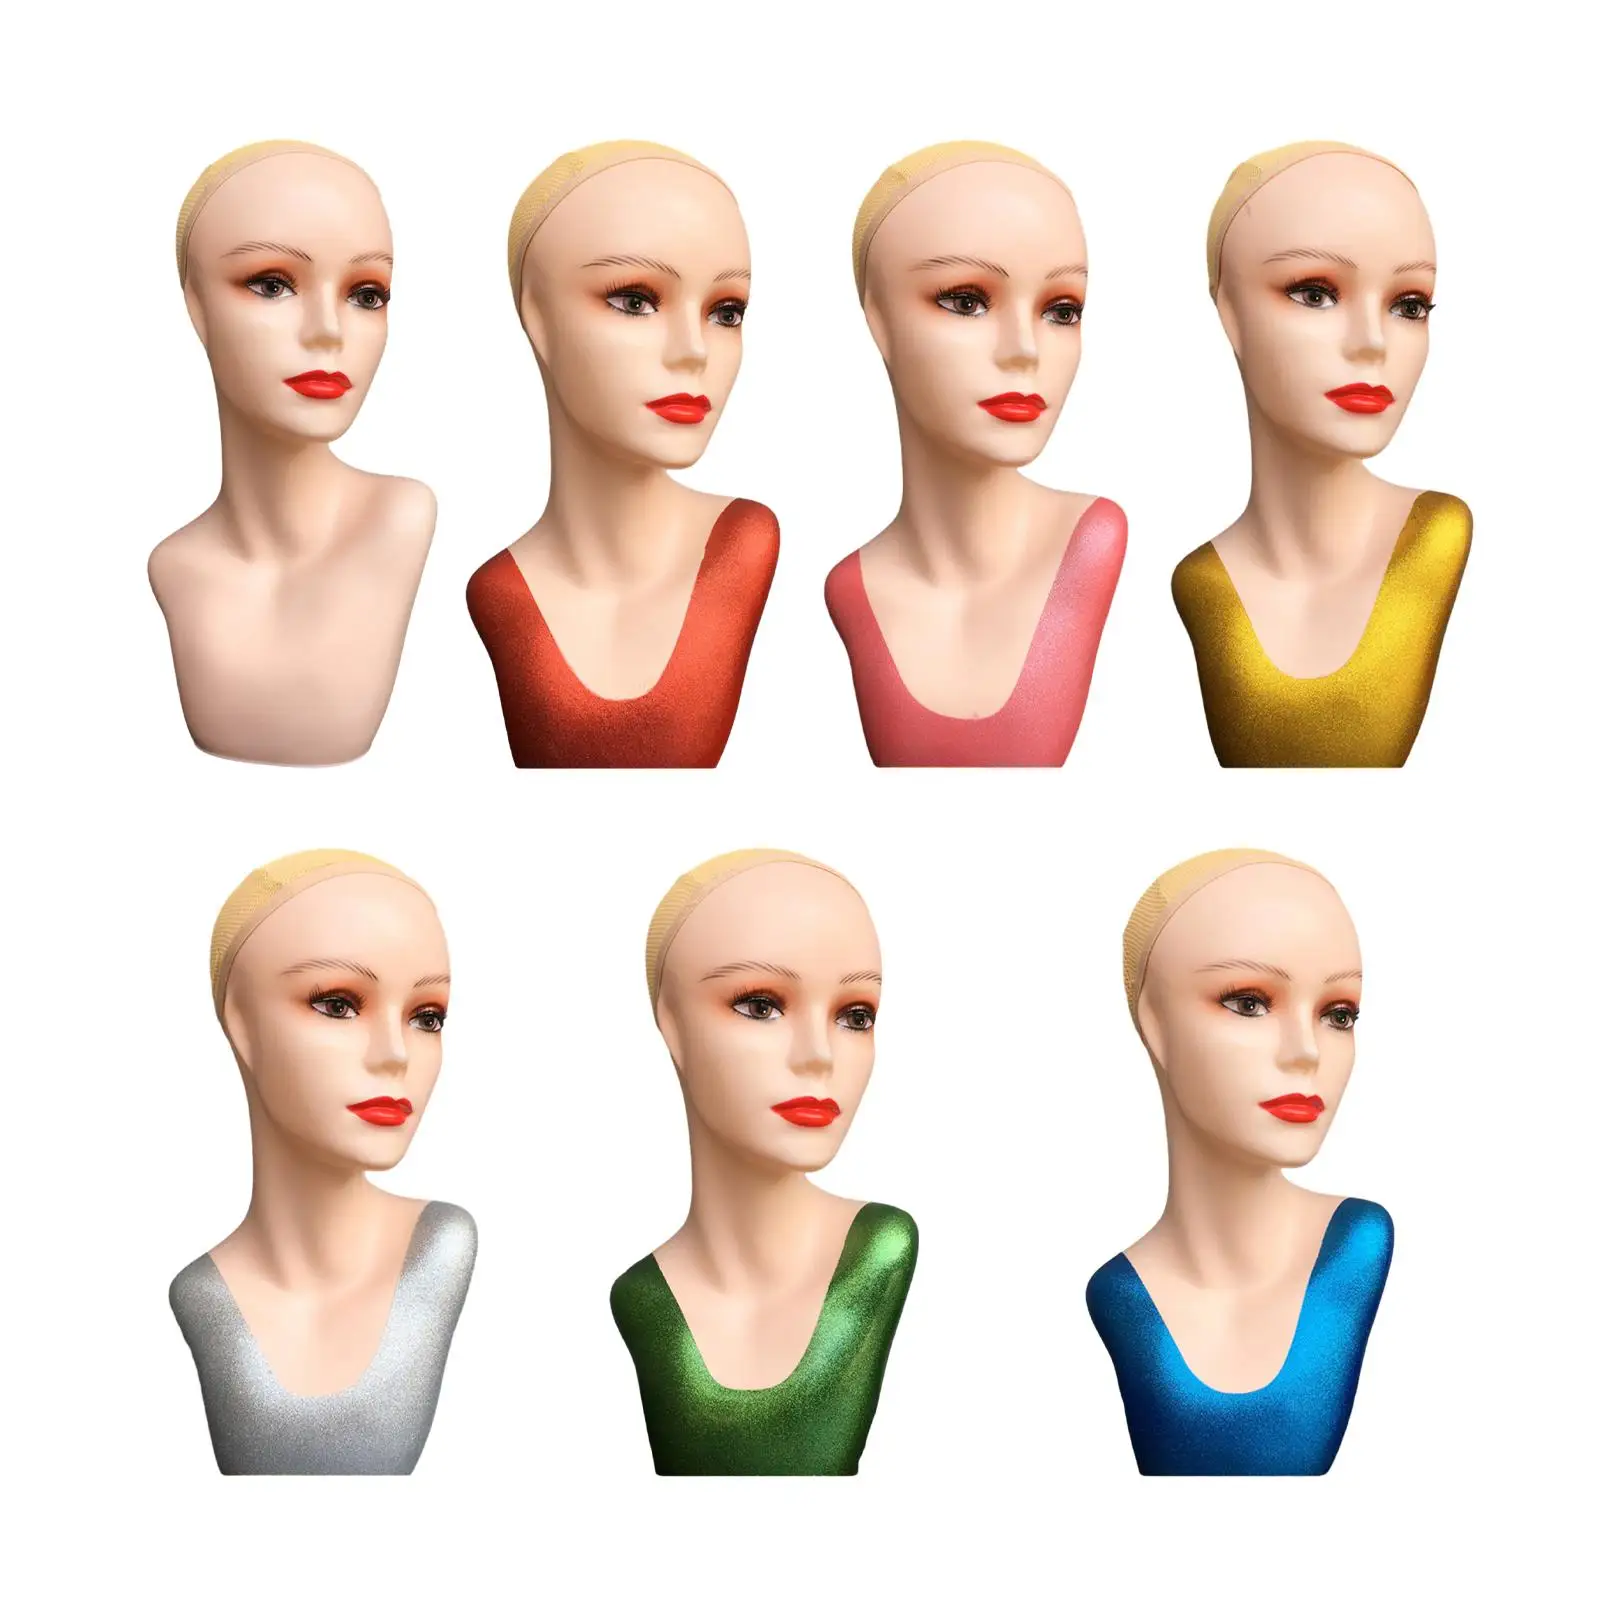 

Makeup Female Bald Mannequin Head 21.26inch Durable Manikin Wigs Display Stand for Hats Scarves Wigs Displaying Making Styling